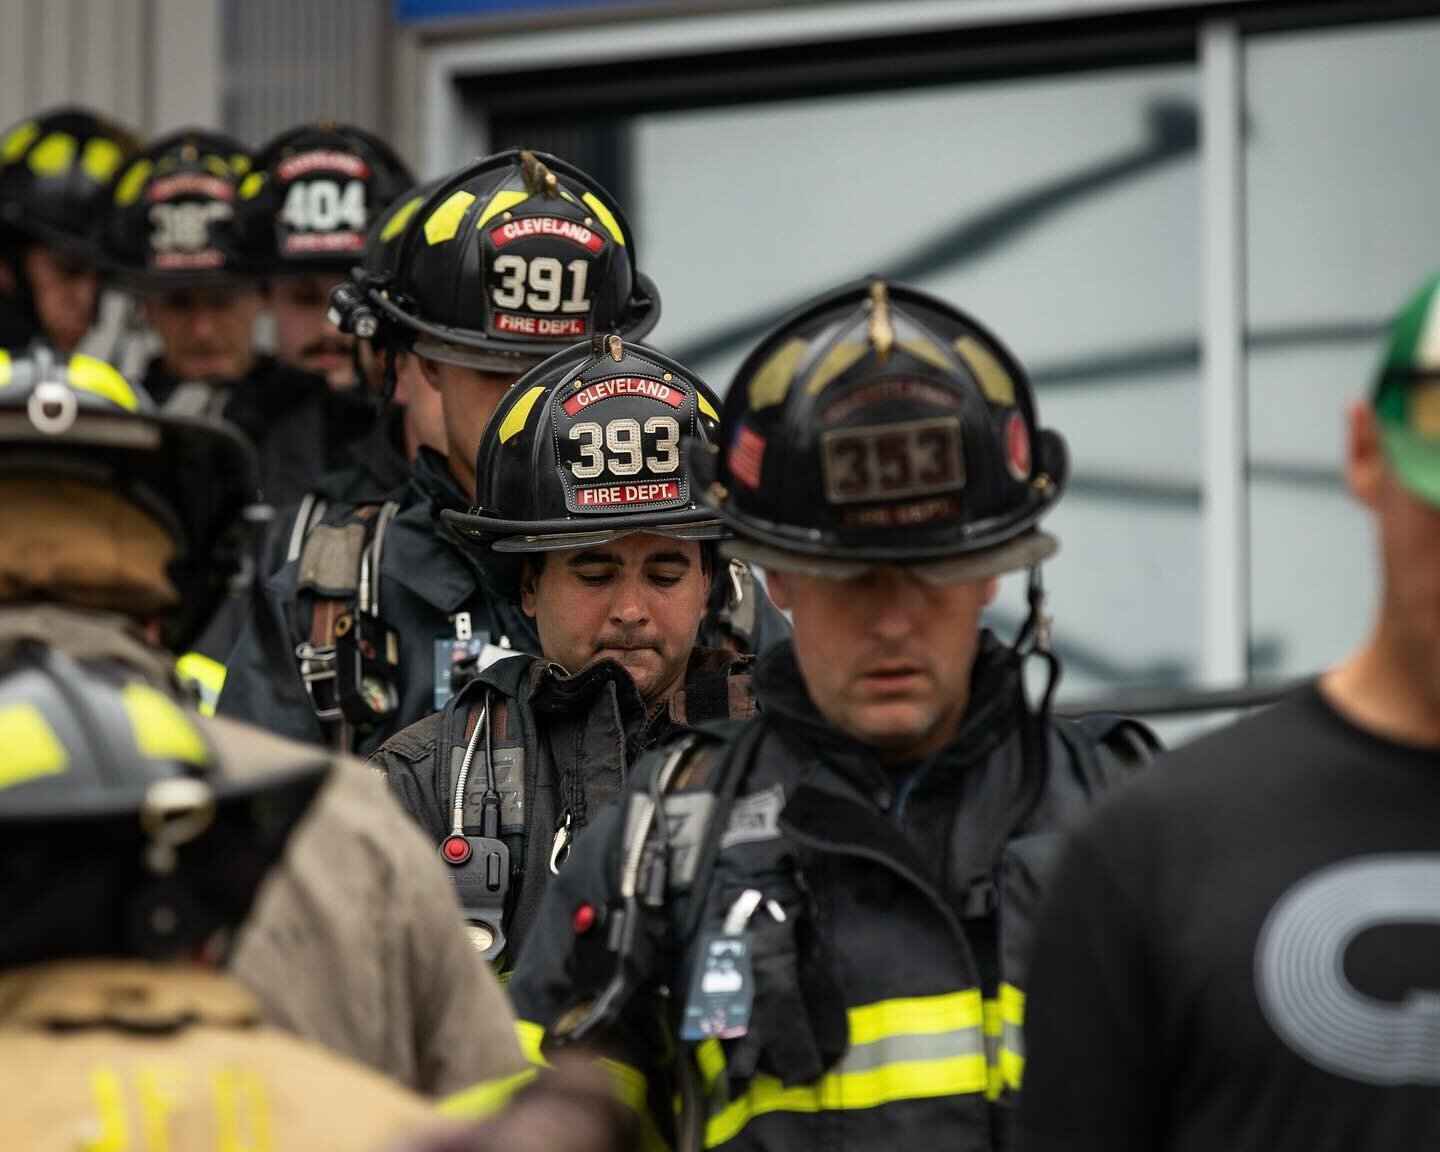 I think this is one of my favorite (non-motorsport) shots to date. I captured these @cityofclevelandtn firefighters back at the 2022 9/11 Memorial Stairclimb in Chattanooga. 🧑🏻&zwj;🚒🚒

@nooga911memorialstairclimb @visitchatt 

#photo #photographe